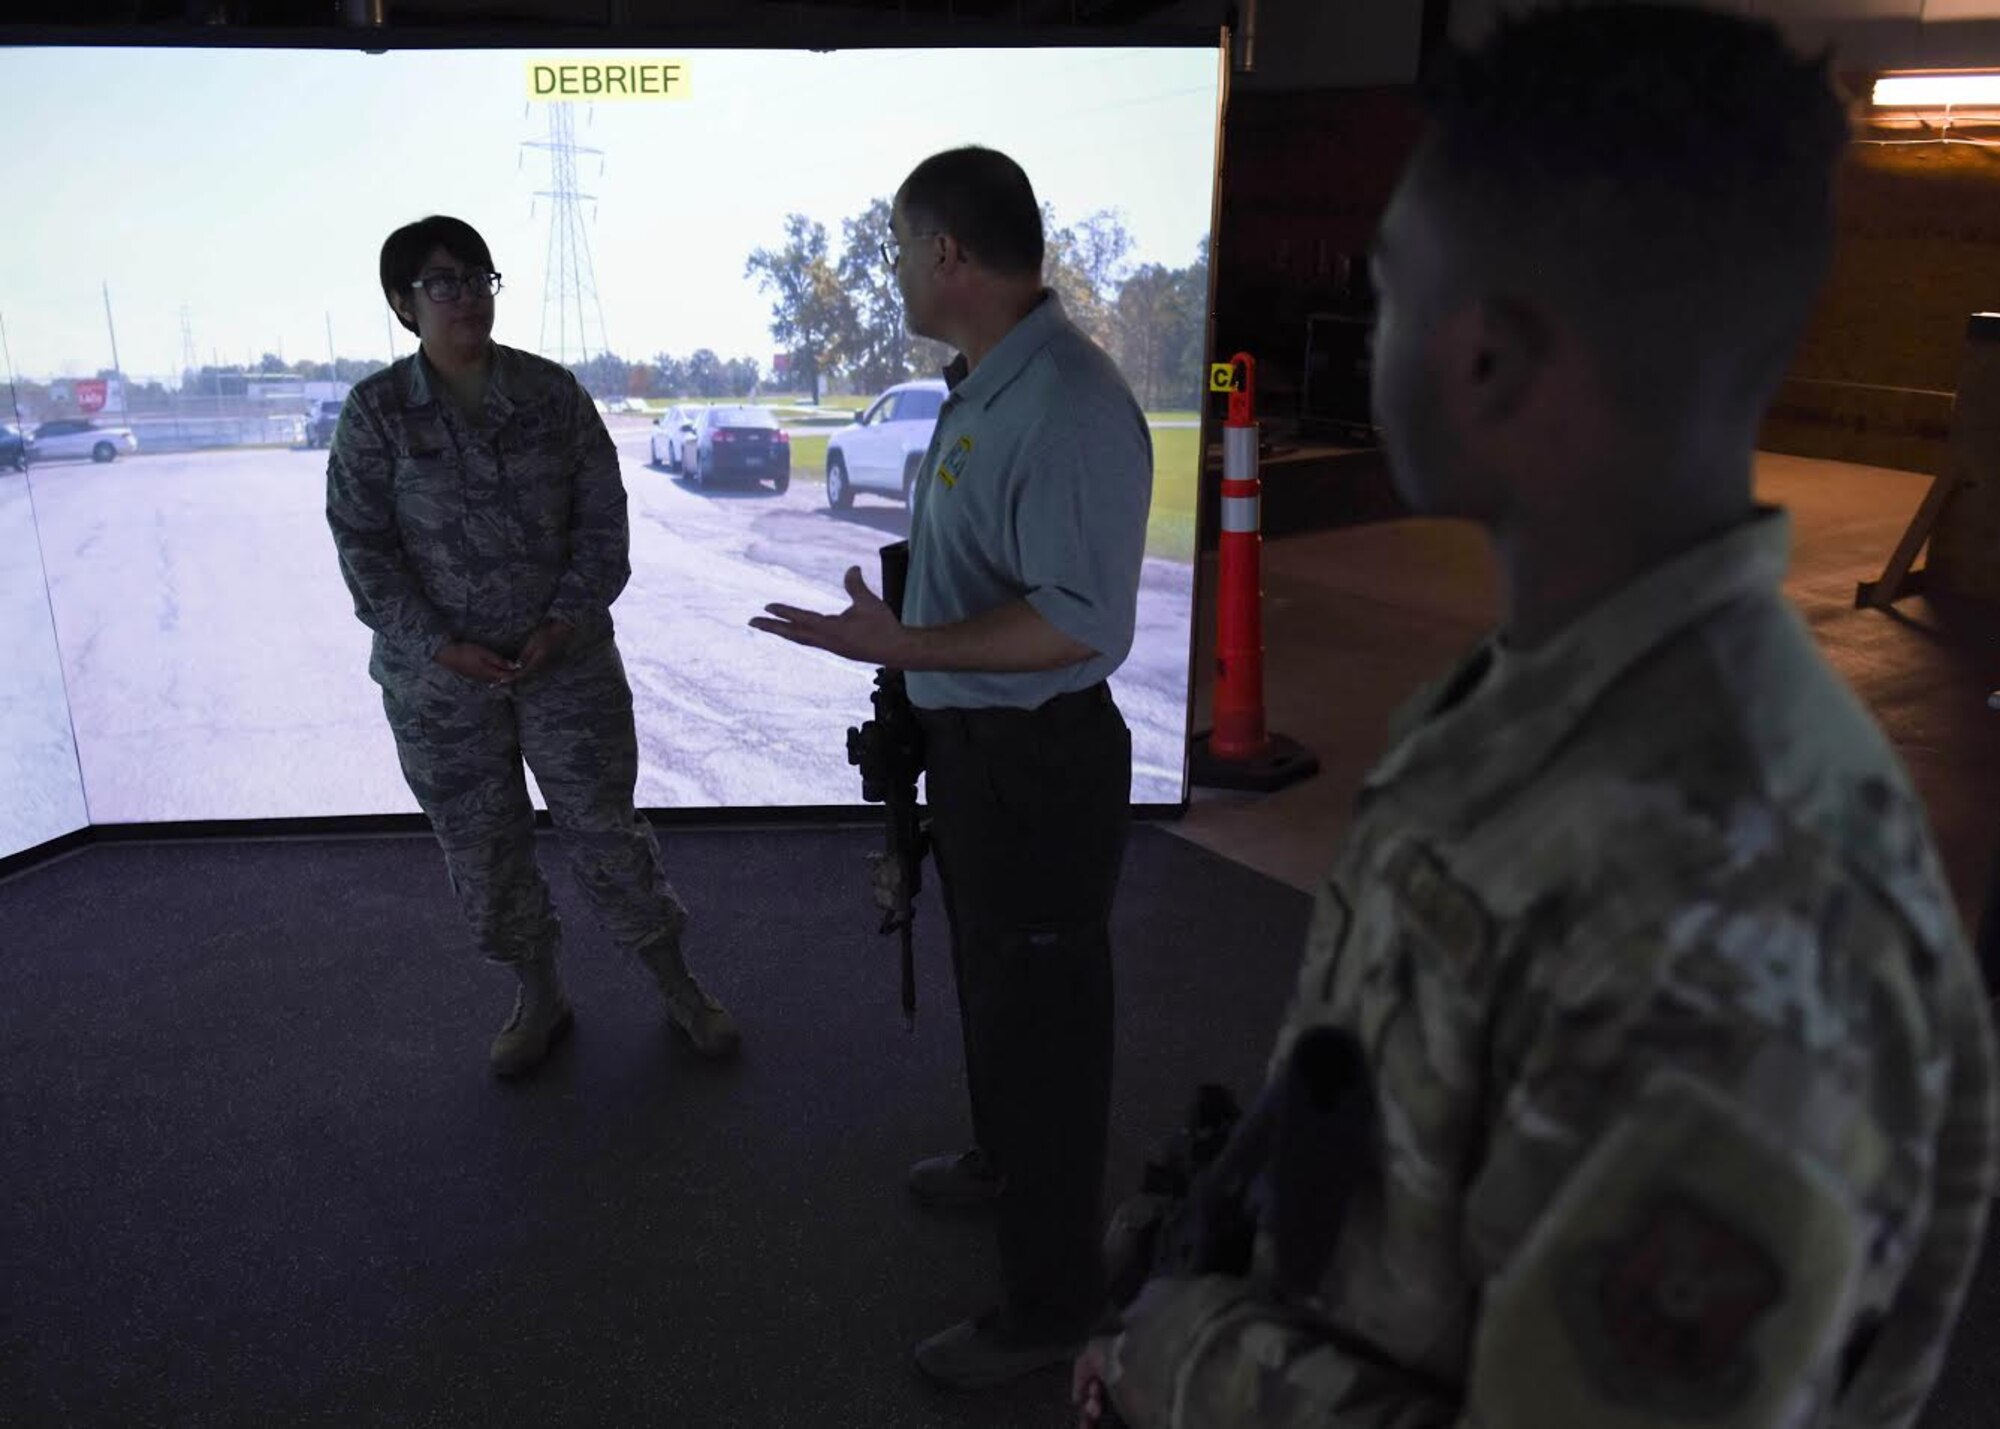 A civilian instructor stands between two Airmen during a debrief on a training simulation about a noise complaint.